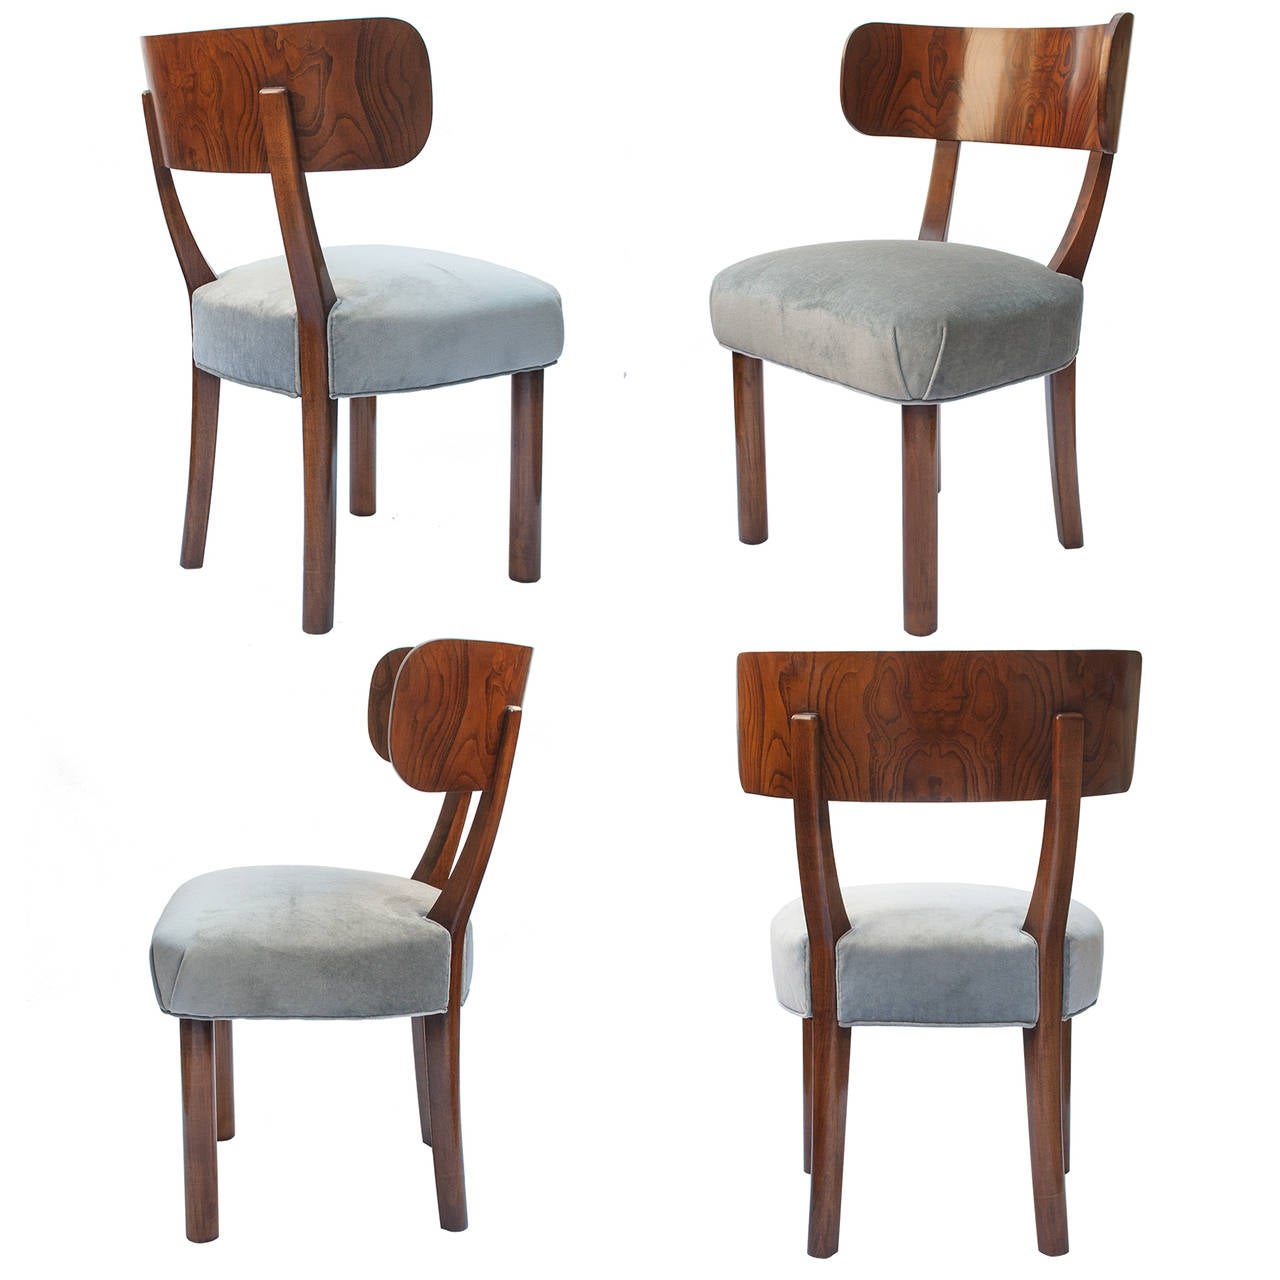 A set of 4 Swedish art deco dining chairs with